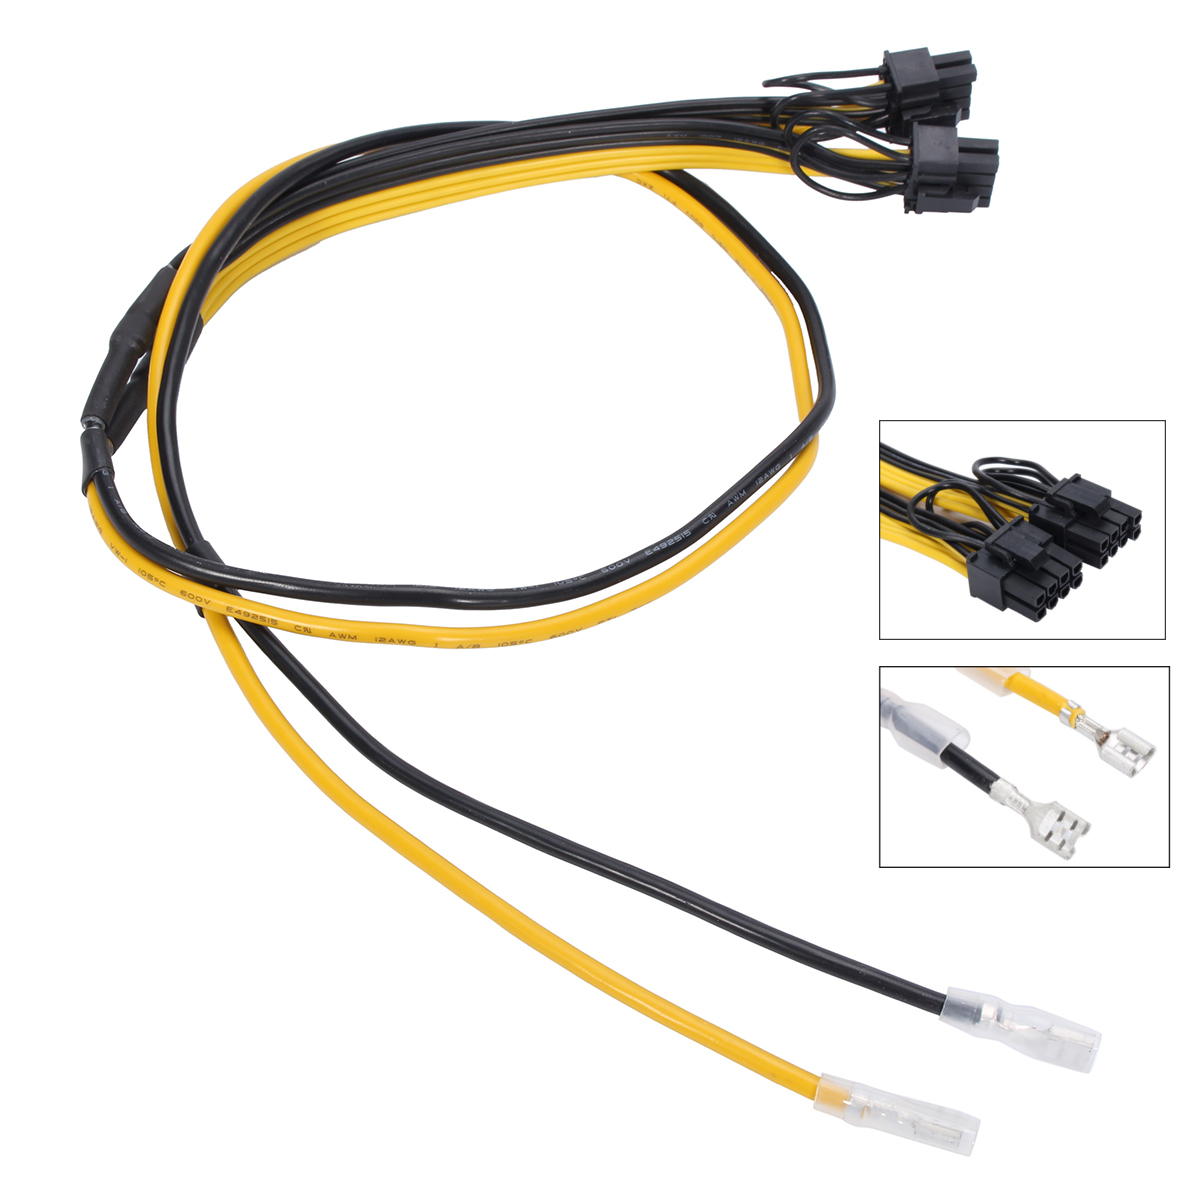 

90cm 12AWG/18AWG Power Cables For Miner Mining Graphics Video Card Board Adapter